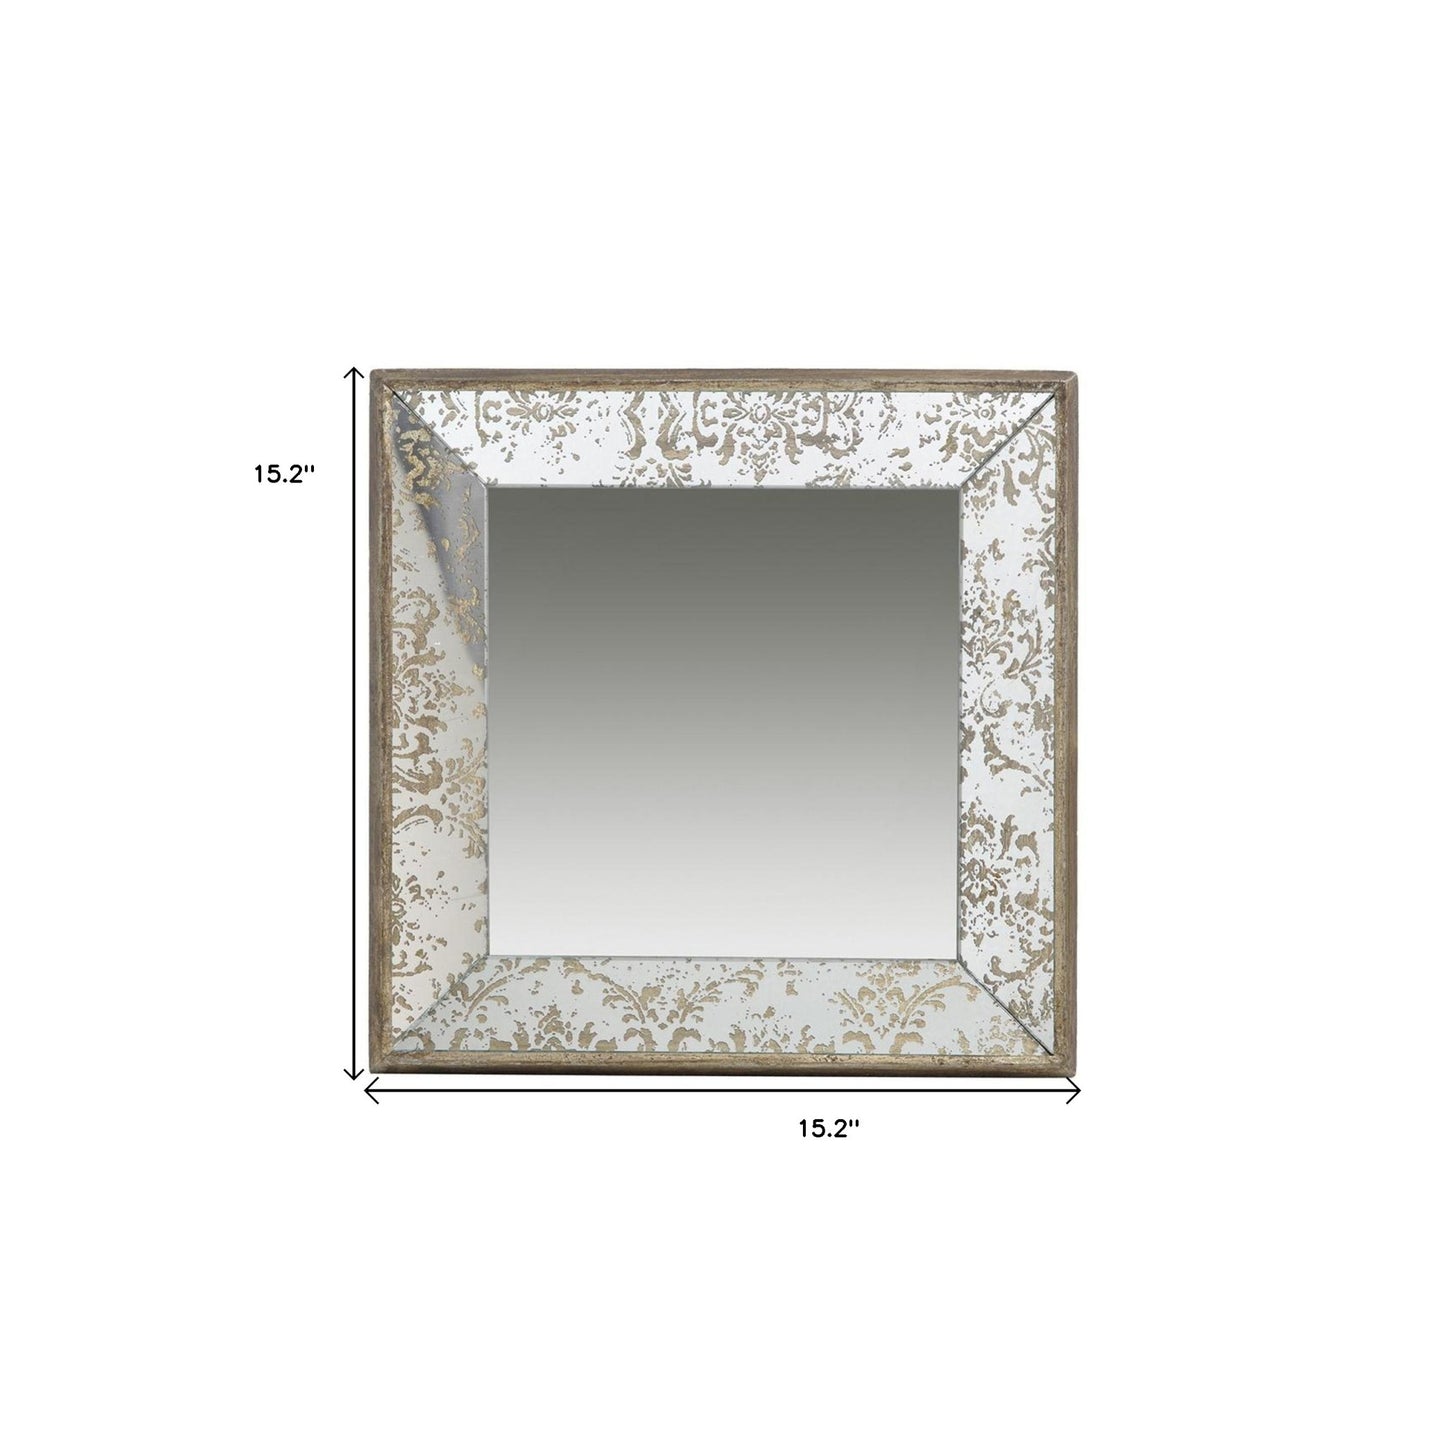 15" Square Vintage Style Wall Mounted Accent Mirror